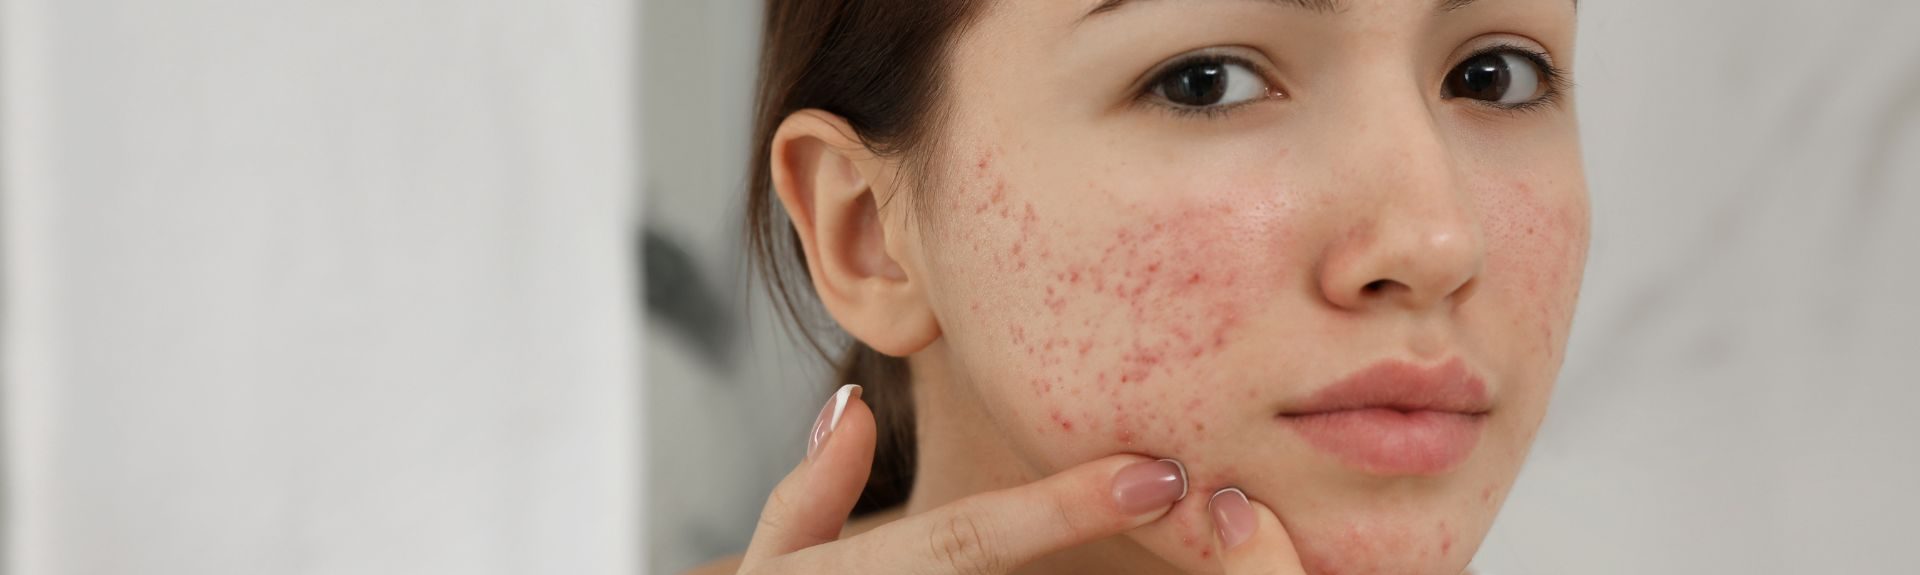 Can a dermatologist help with acne